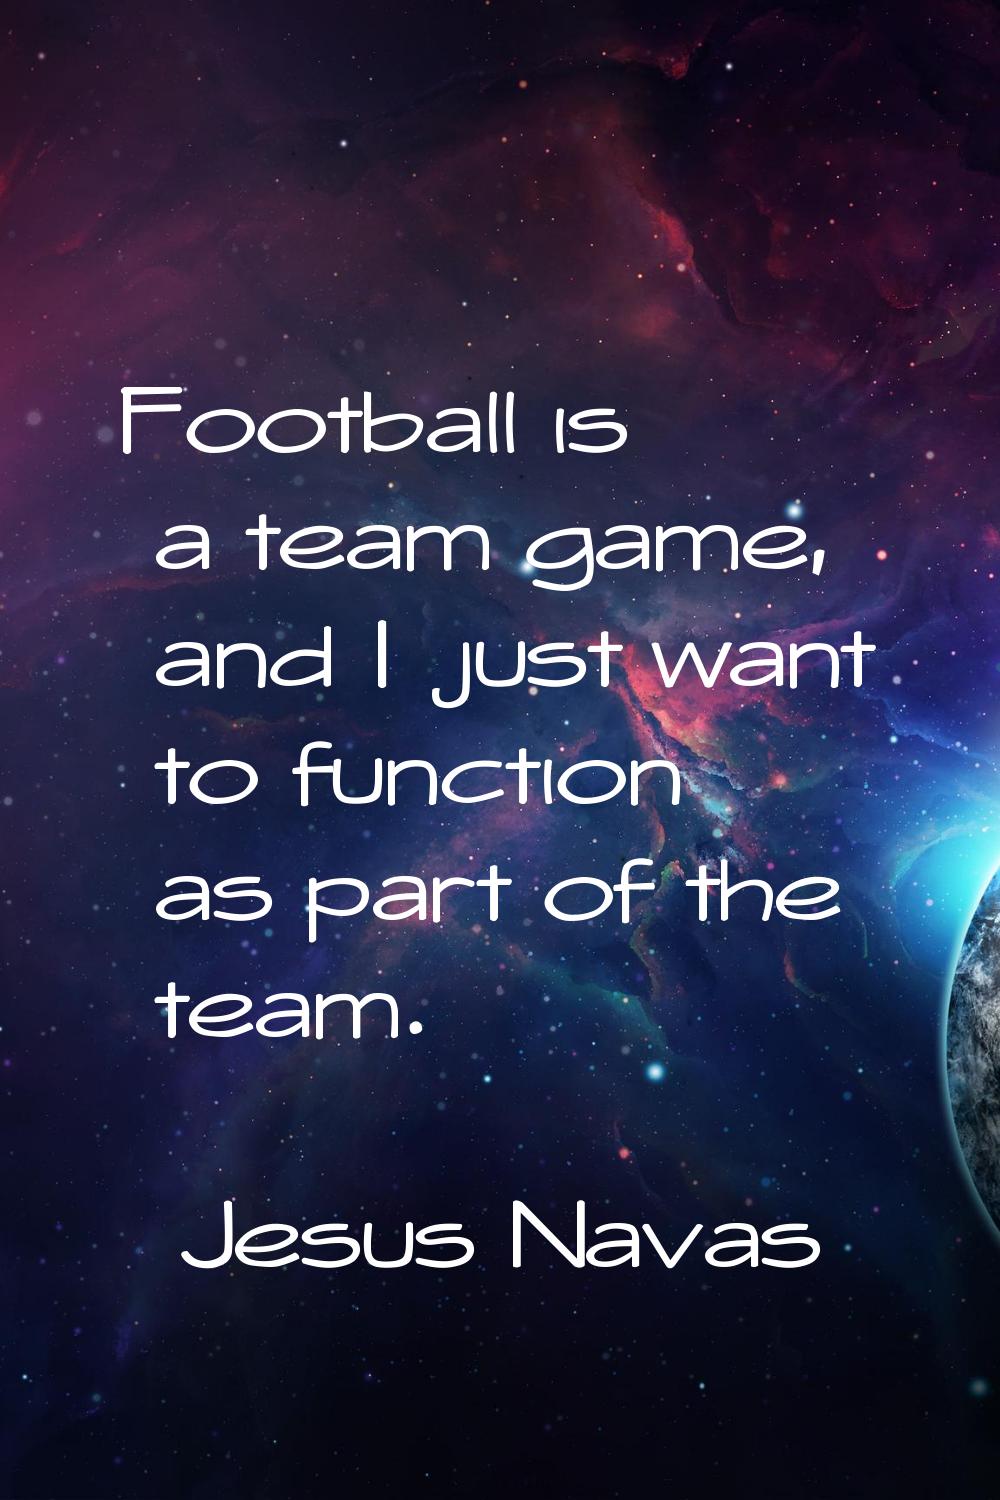 Football is a team game, and I just want to function as part of the team.